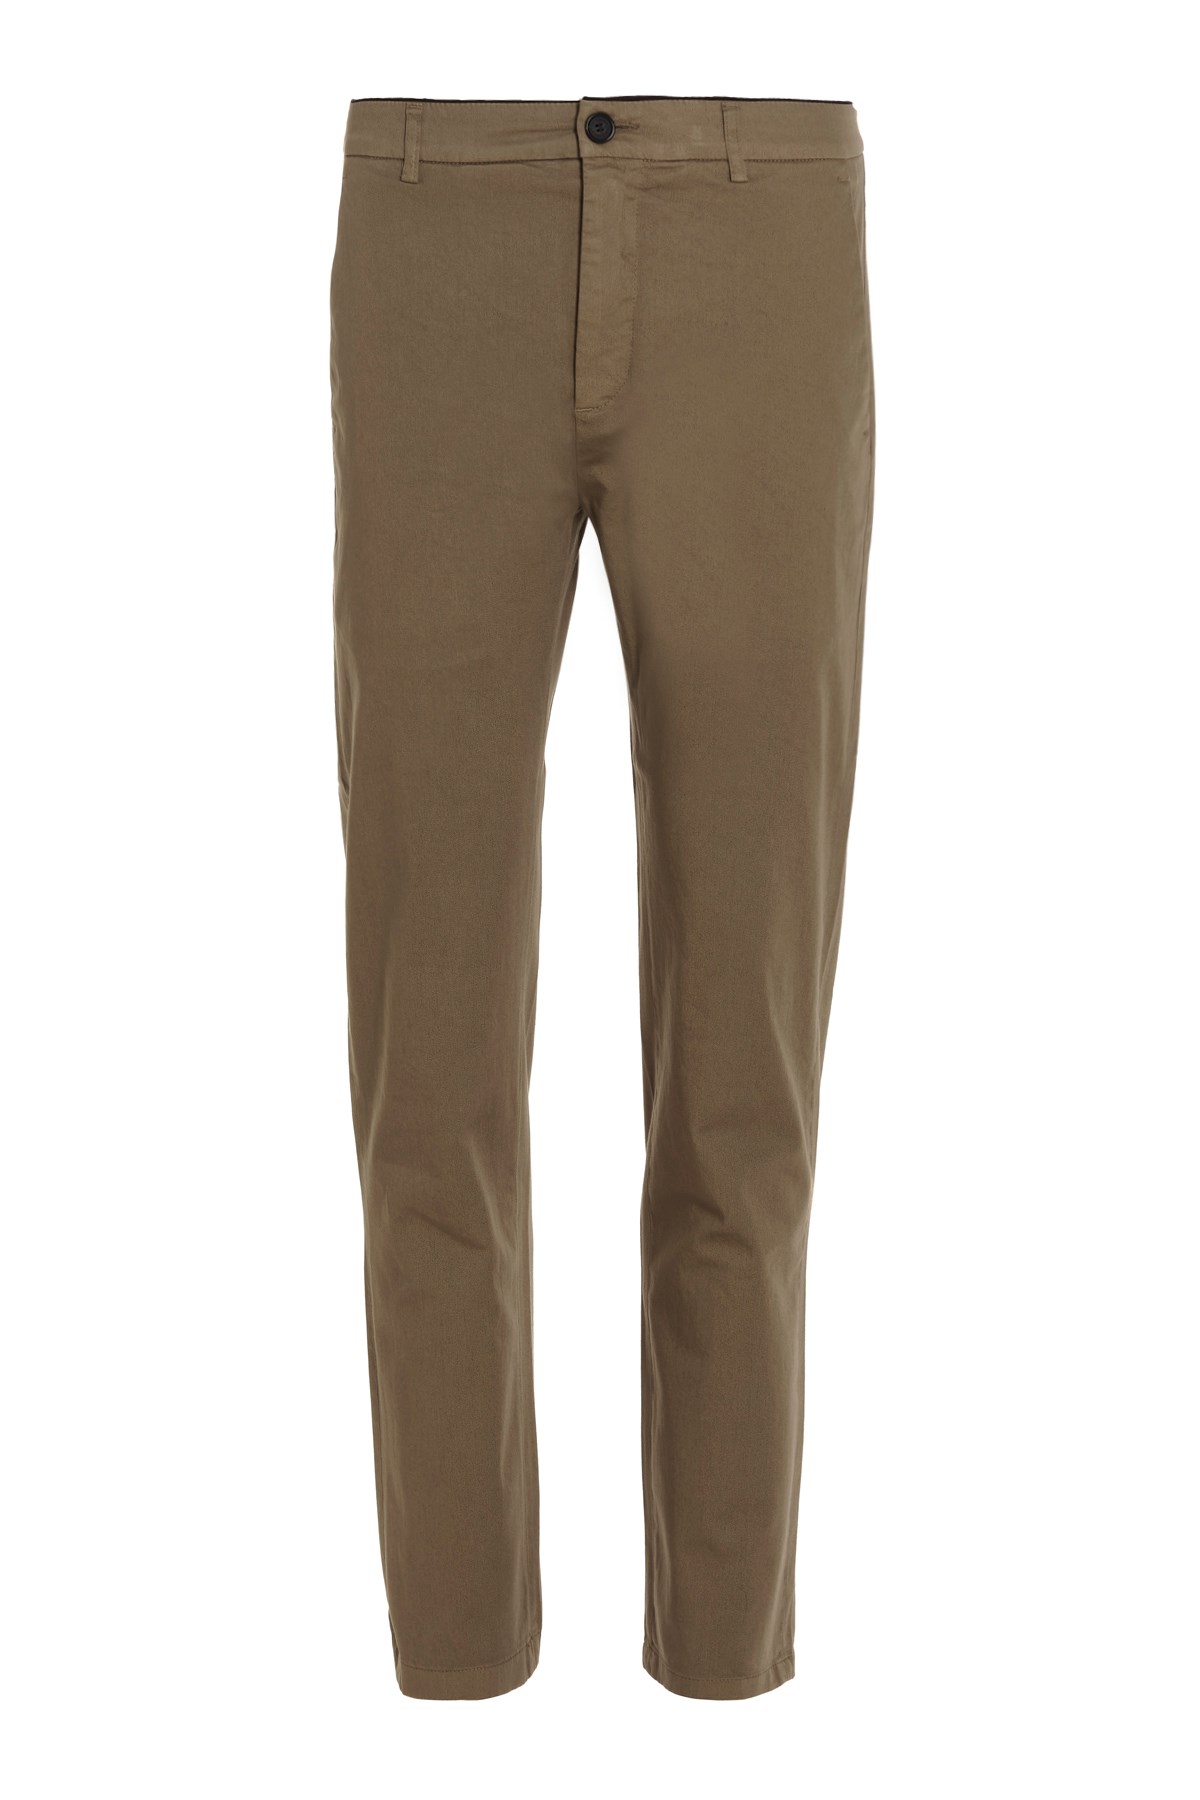 DEPARTMENT 5 ‘Prince' Chino Trousers